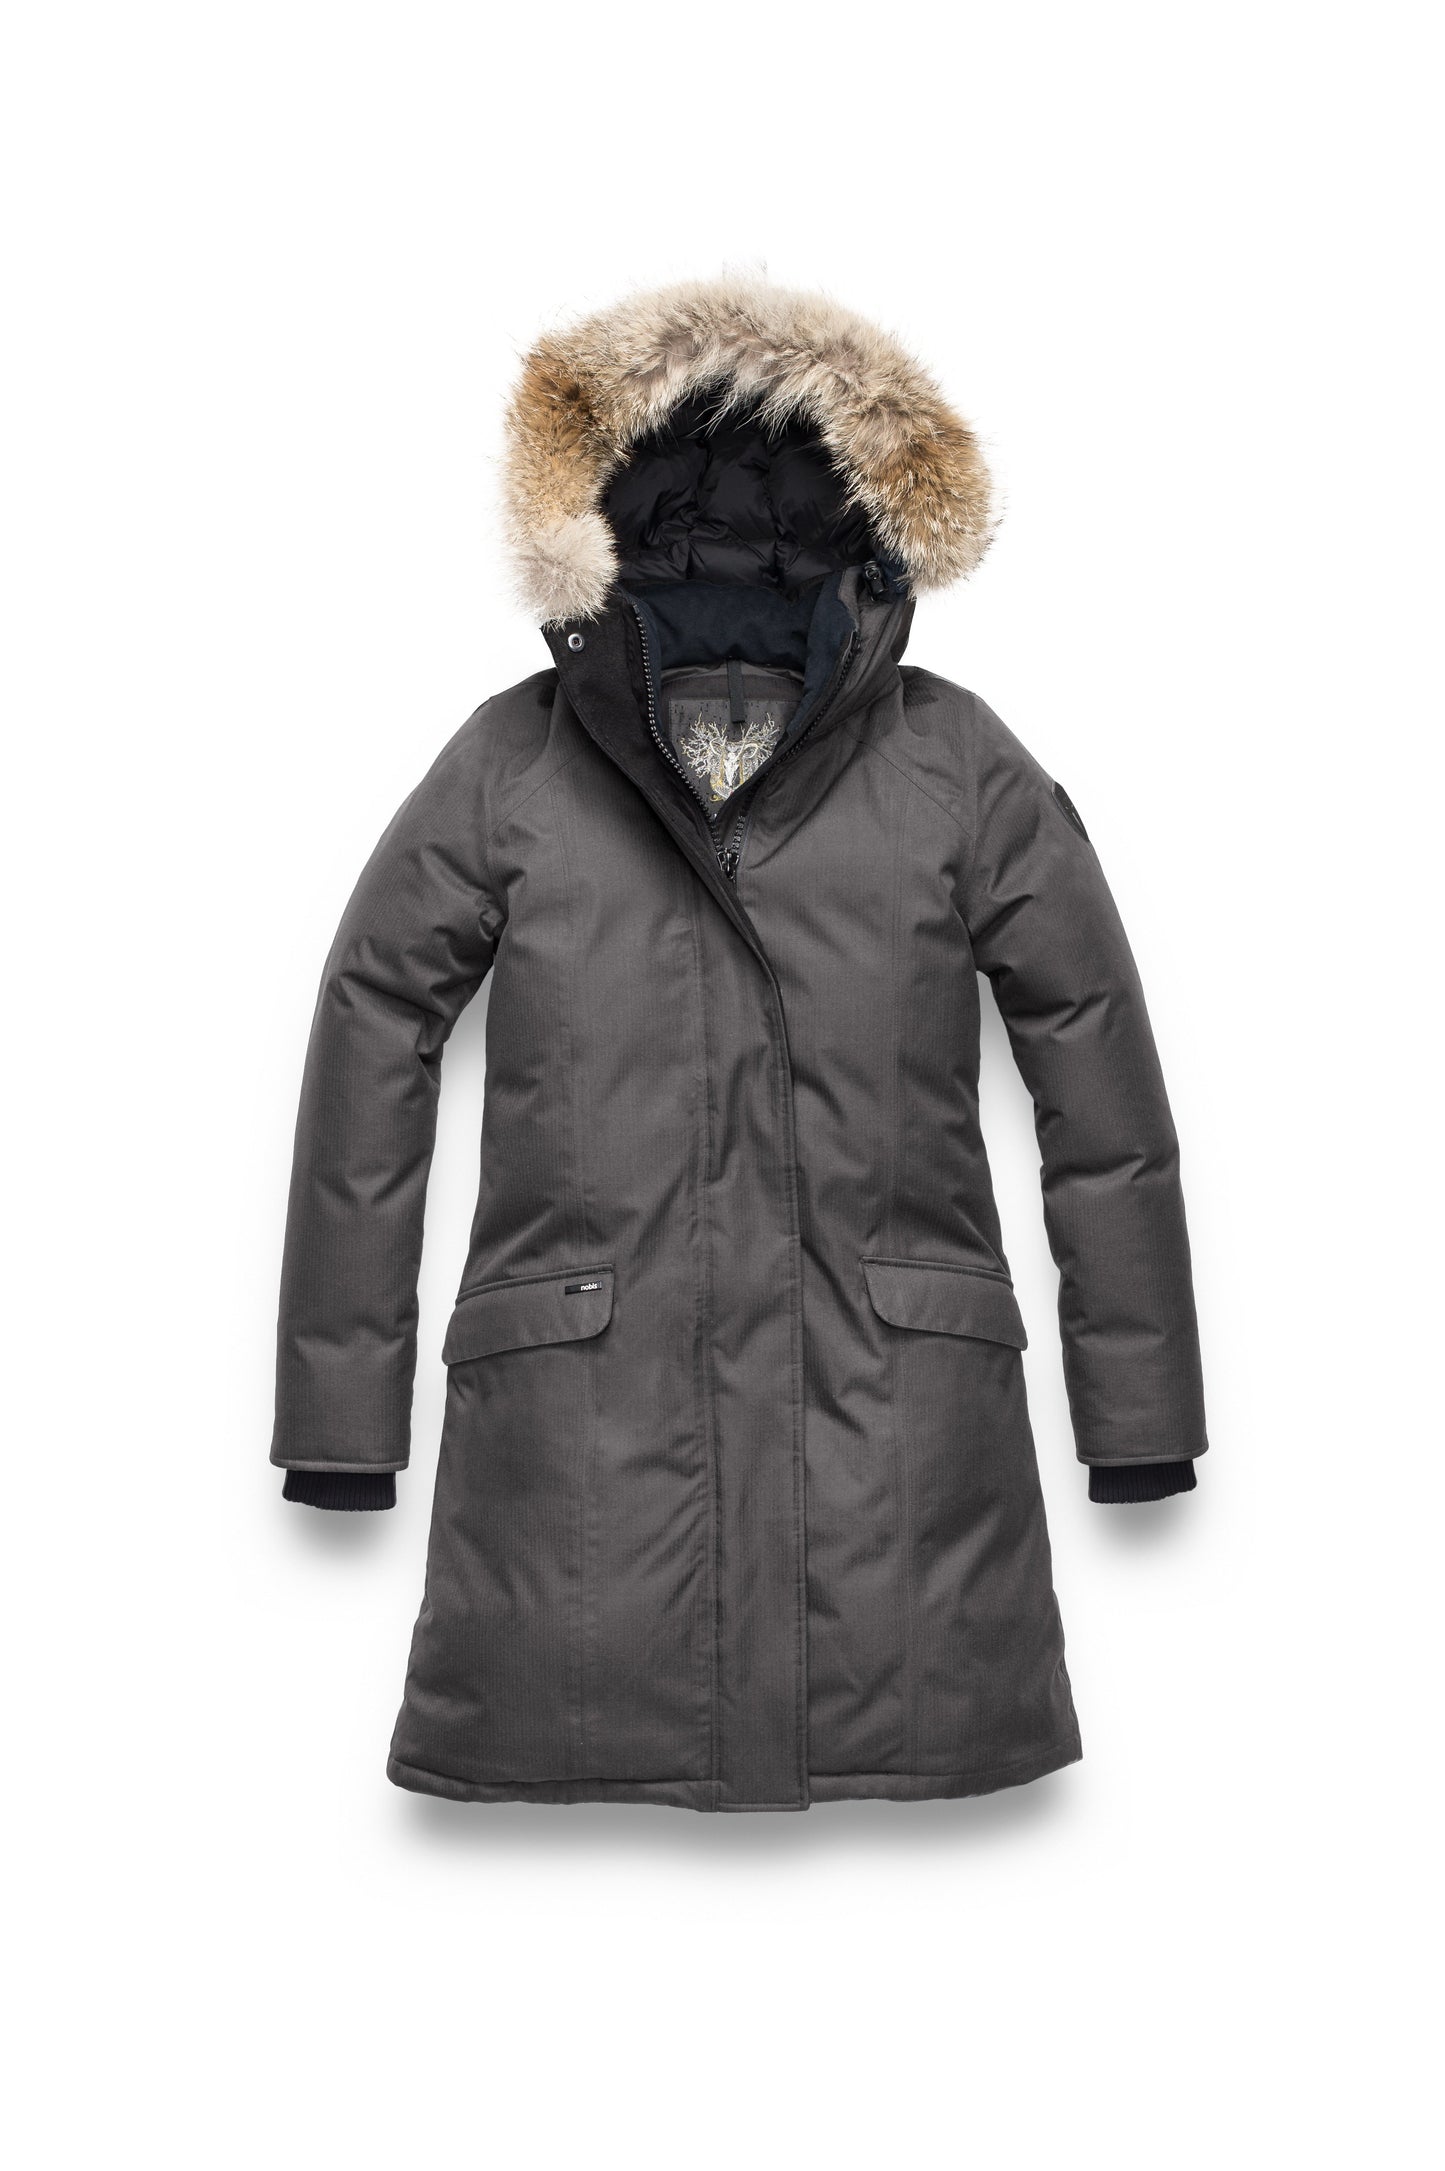 Rebecca Women's Parka in knee length, Canadian duck down insulation, two-way zipper with magnetic front placket, non-removable hood with removable coyote fur trim, in Steel Grey